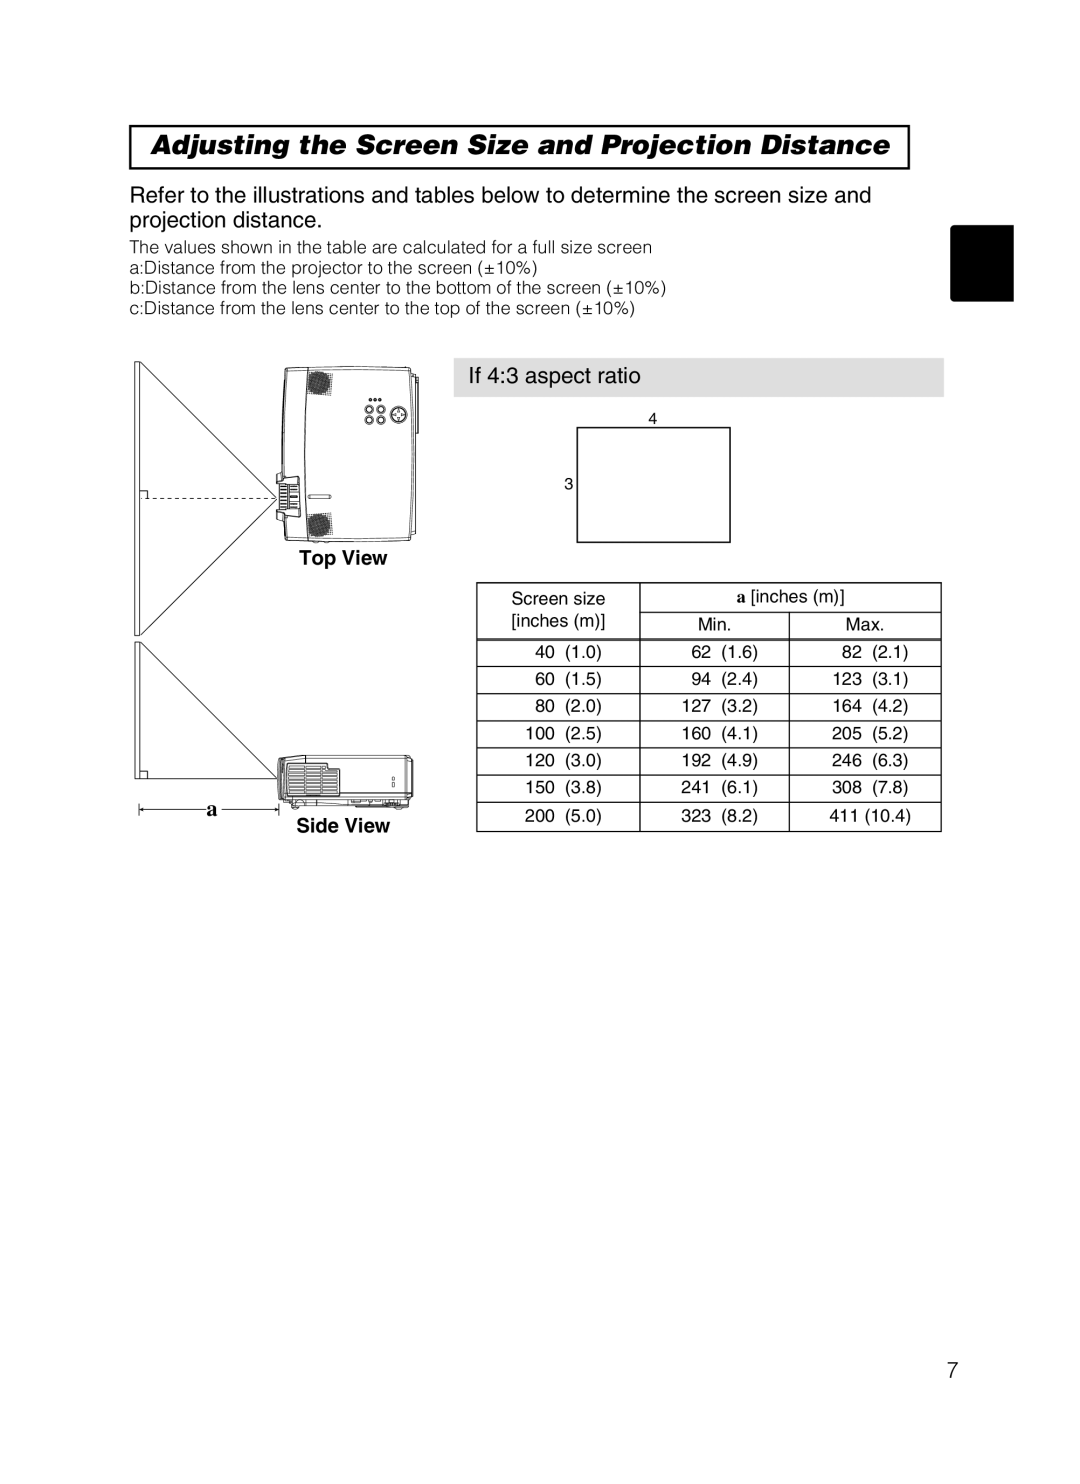 Grundig CP-X385W user manual Adjusting the Screen Size and Projection Distance, If 43 aspect ratio 